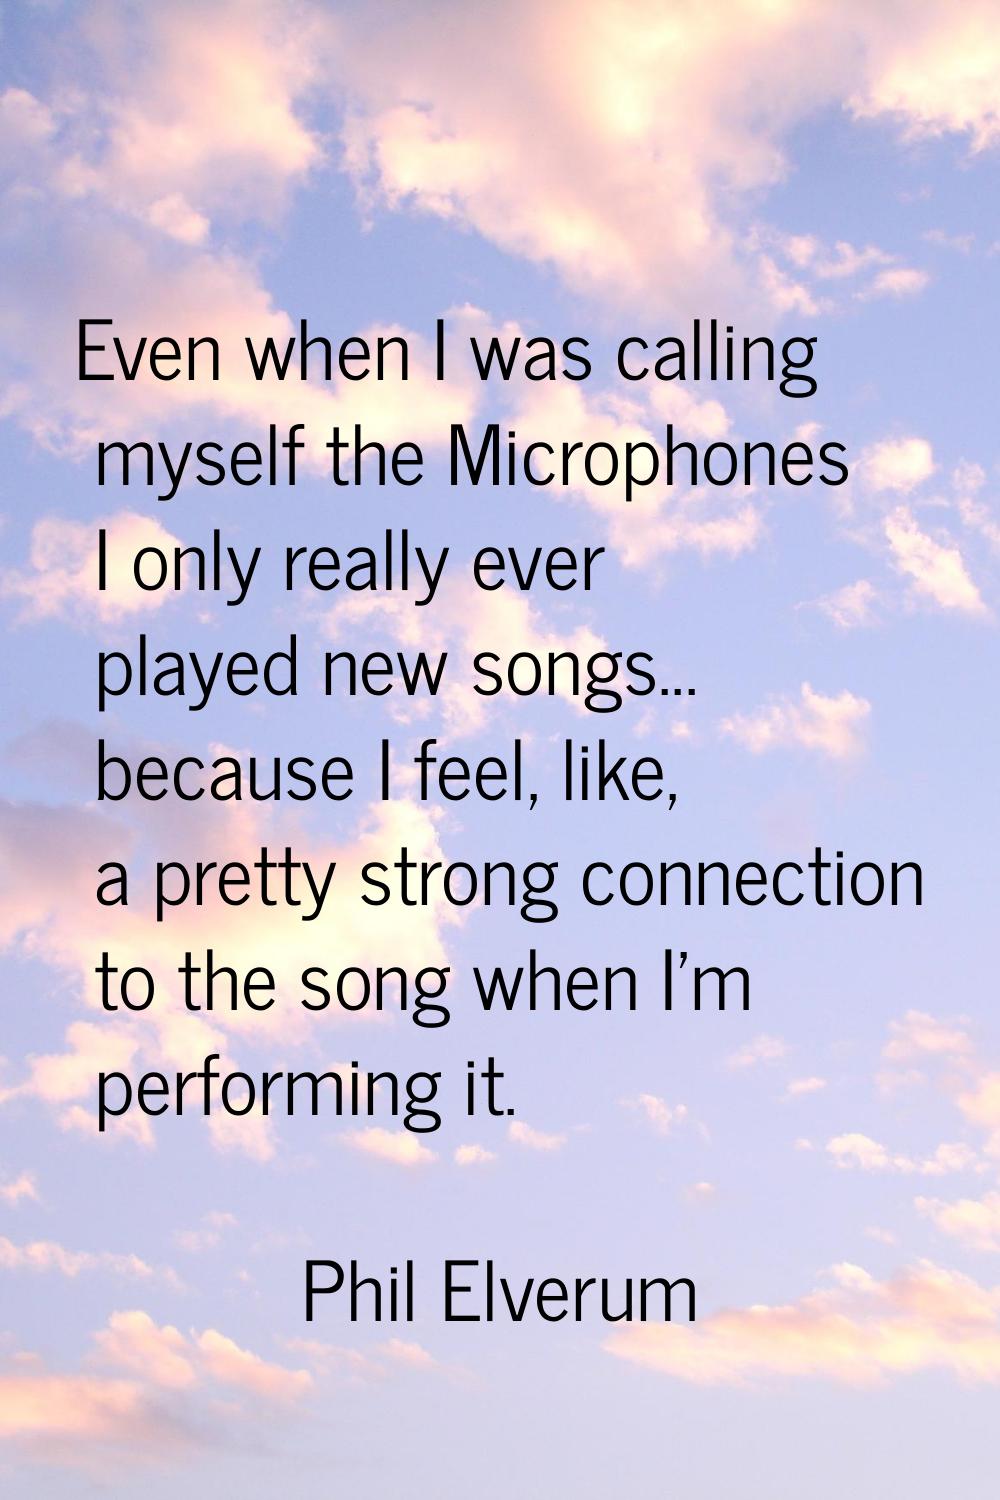 Even when I was calling myself the Microphones I only really ever played new songs... because I fee